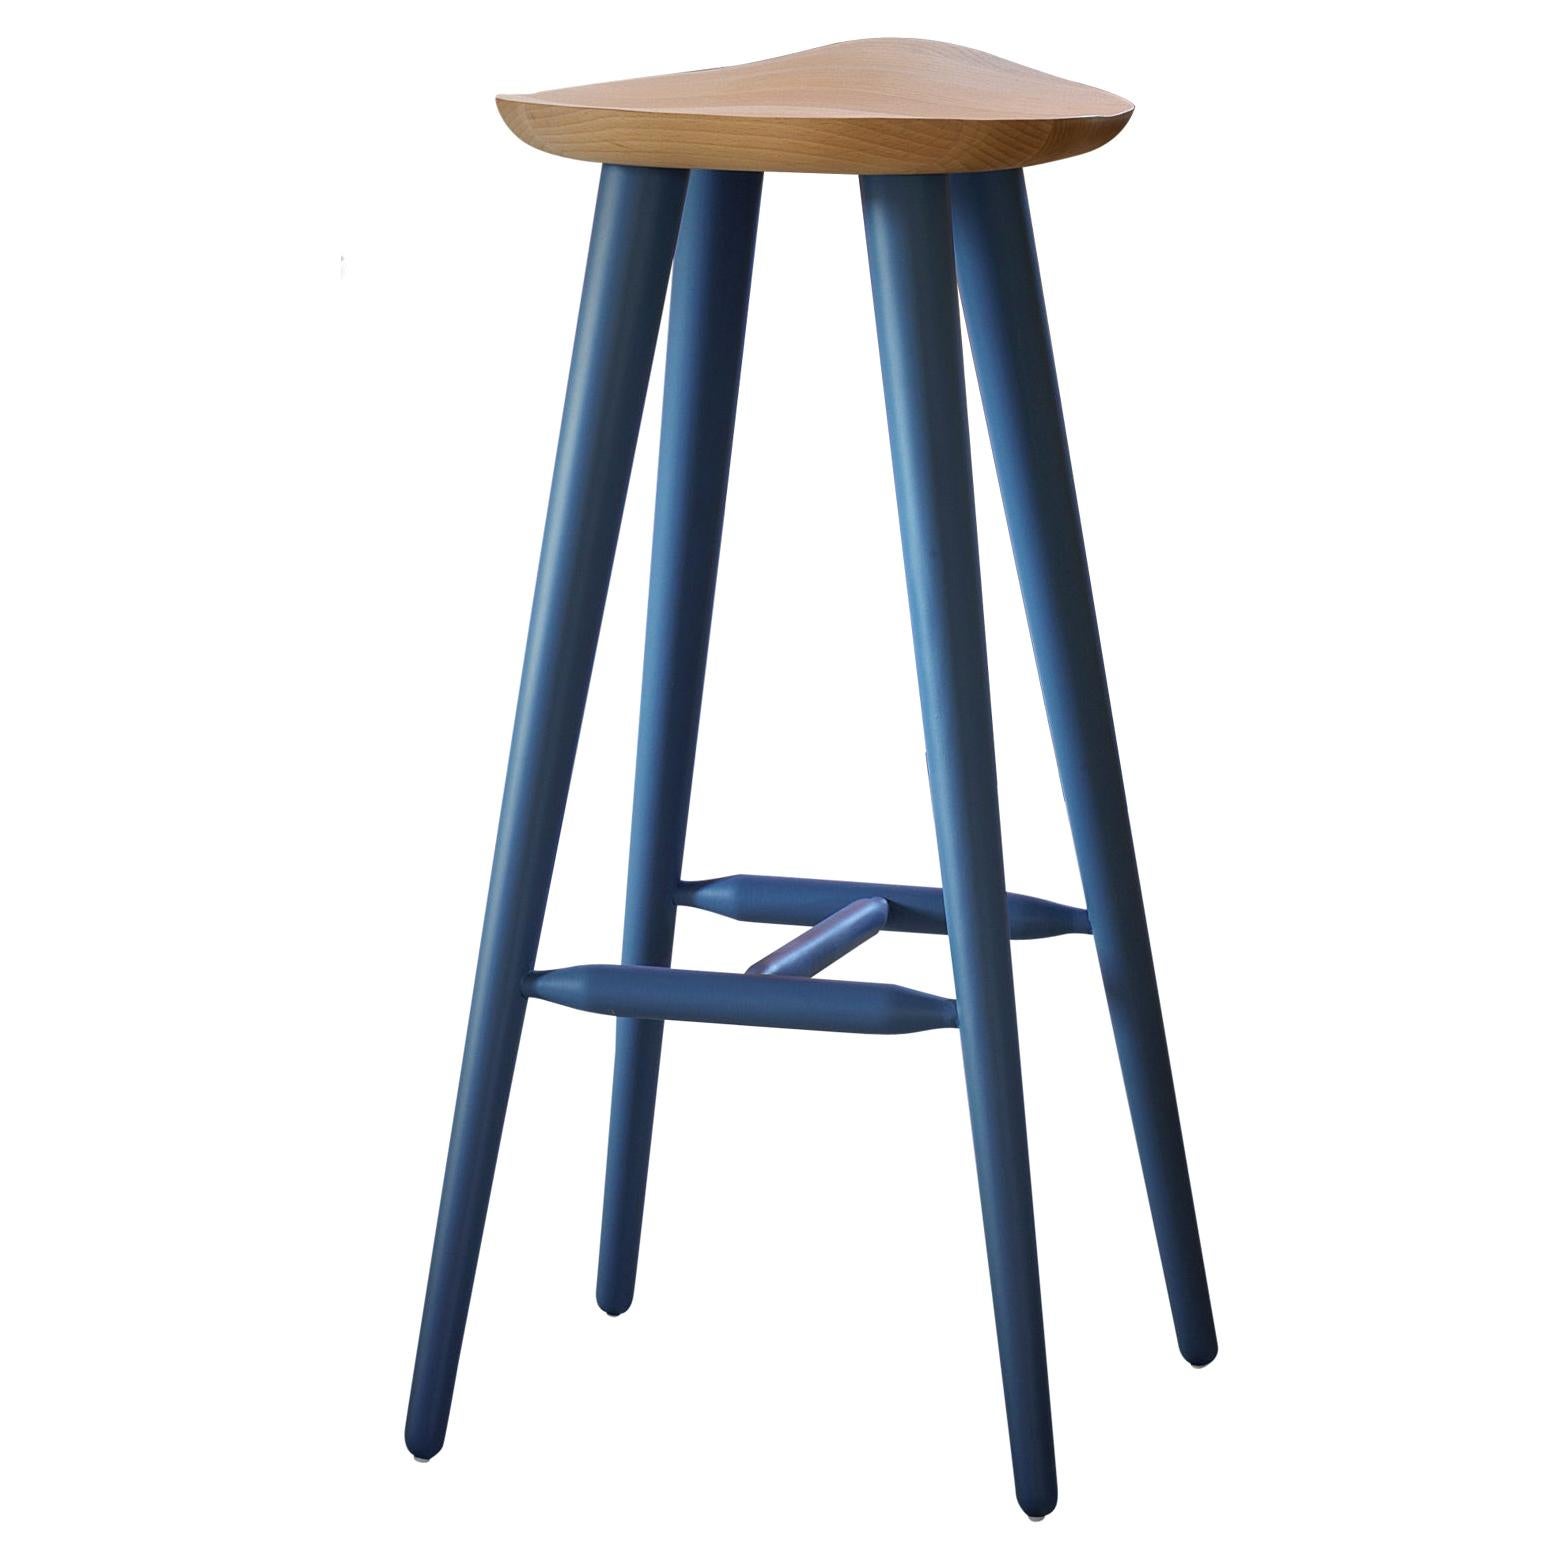 Lechuck Medium Stool in Beech Wood Top with Lacquered Intense Blue Legs For Sale